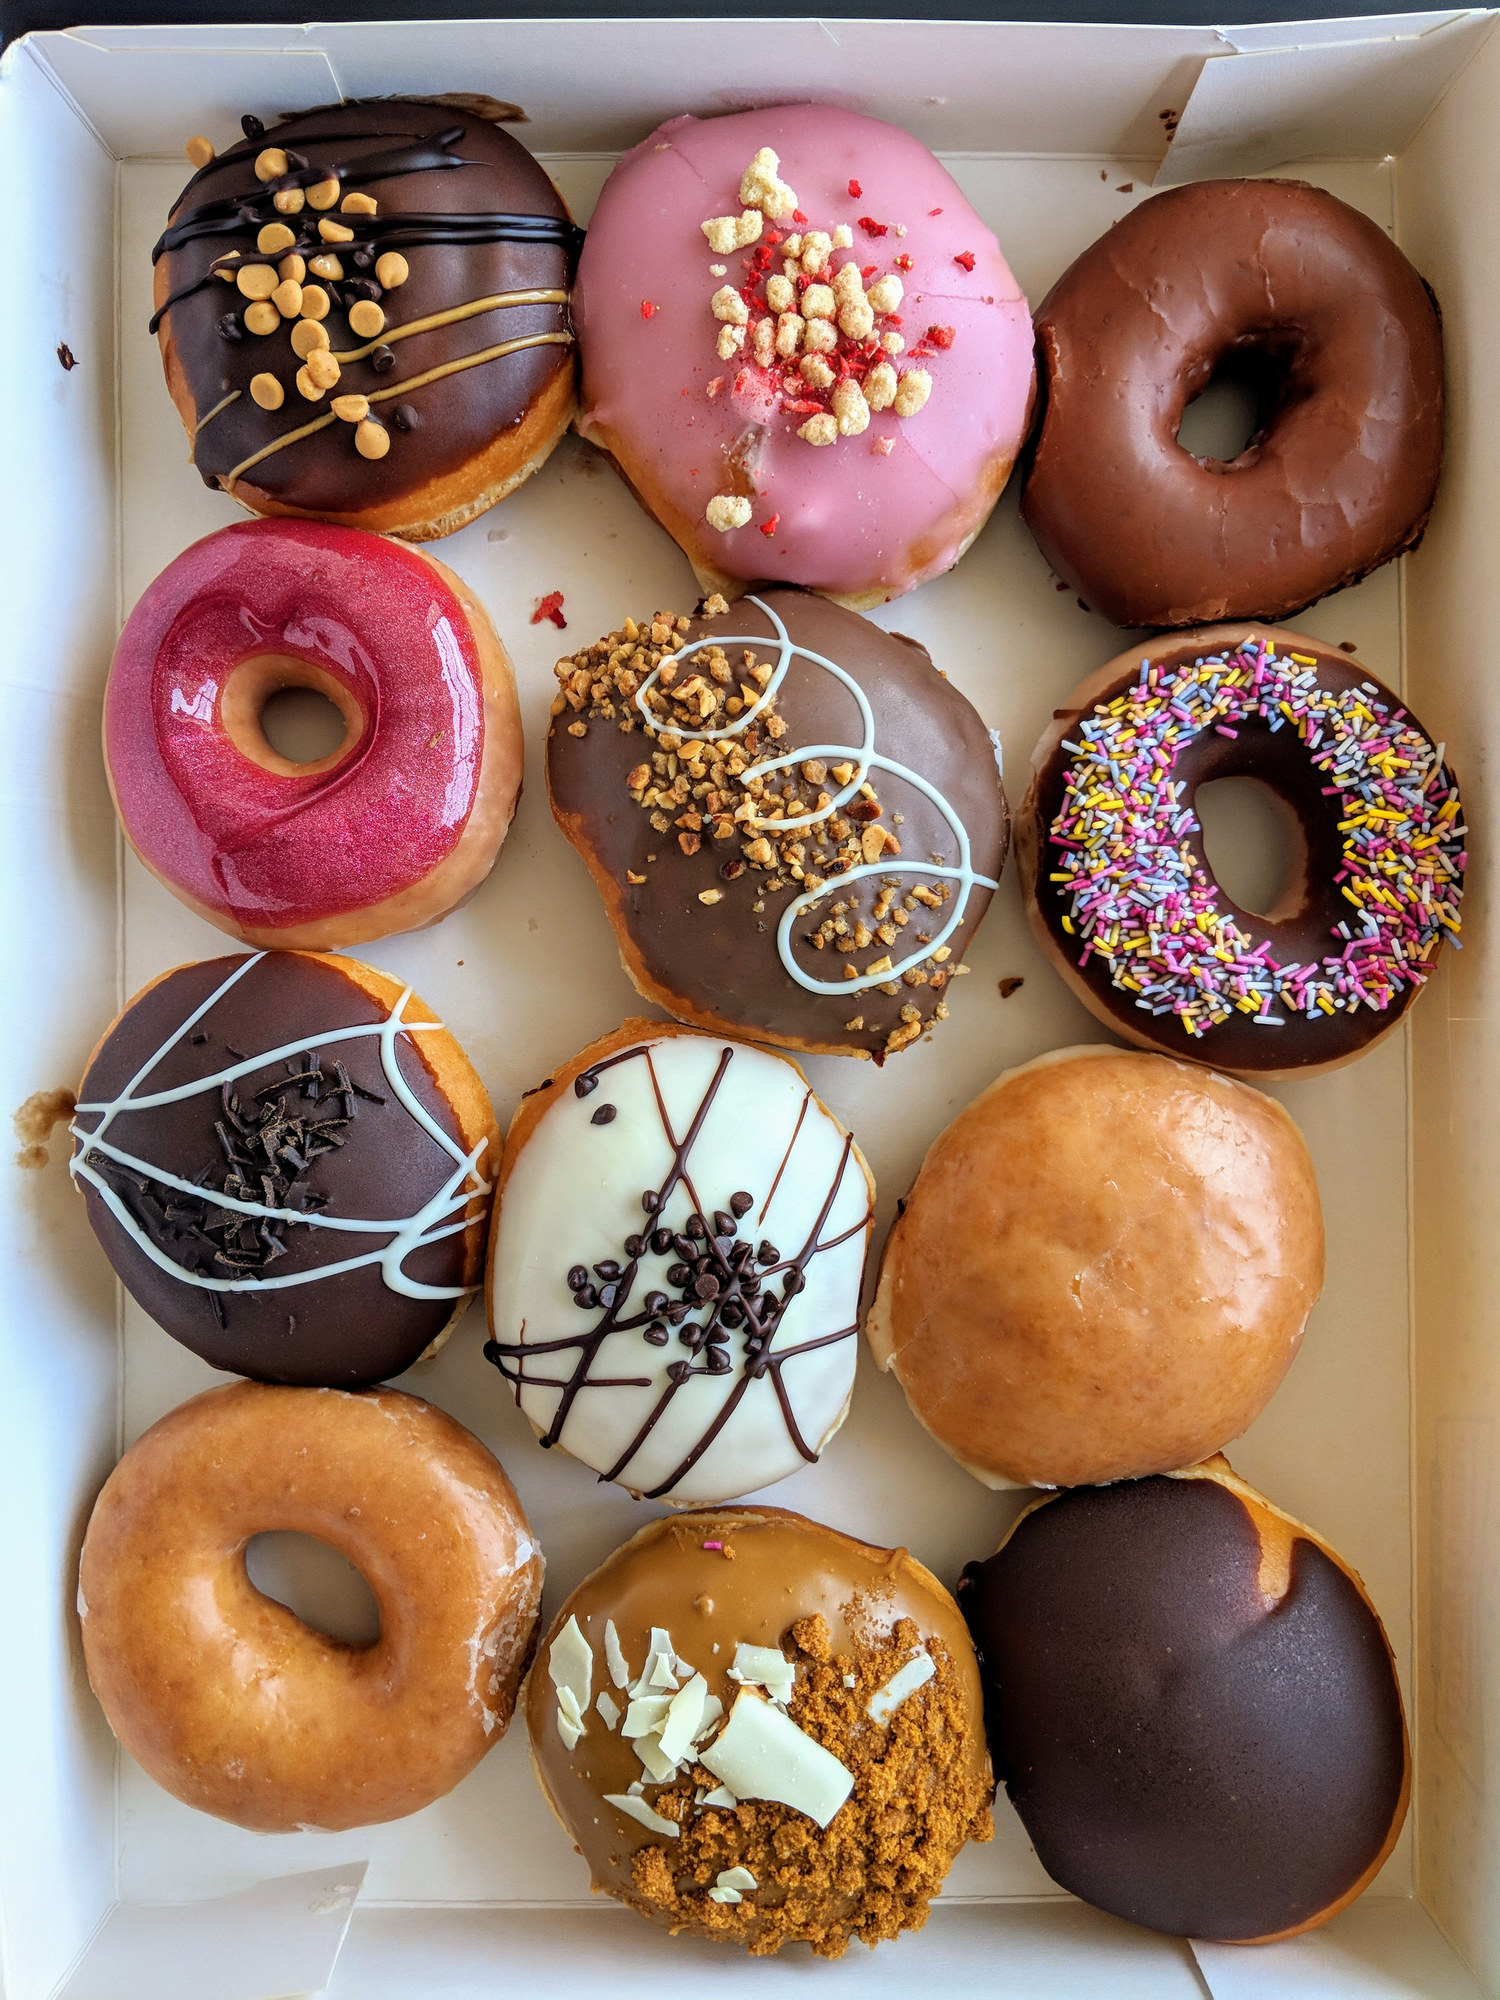 A box of donuts.